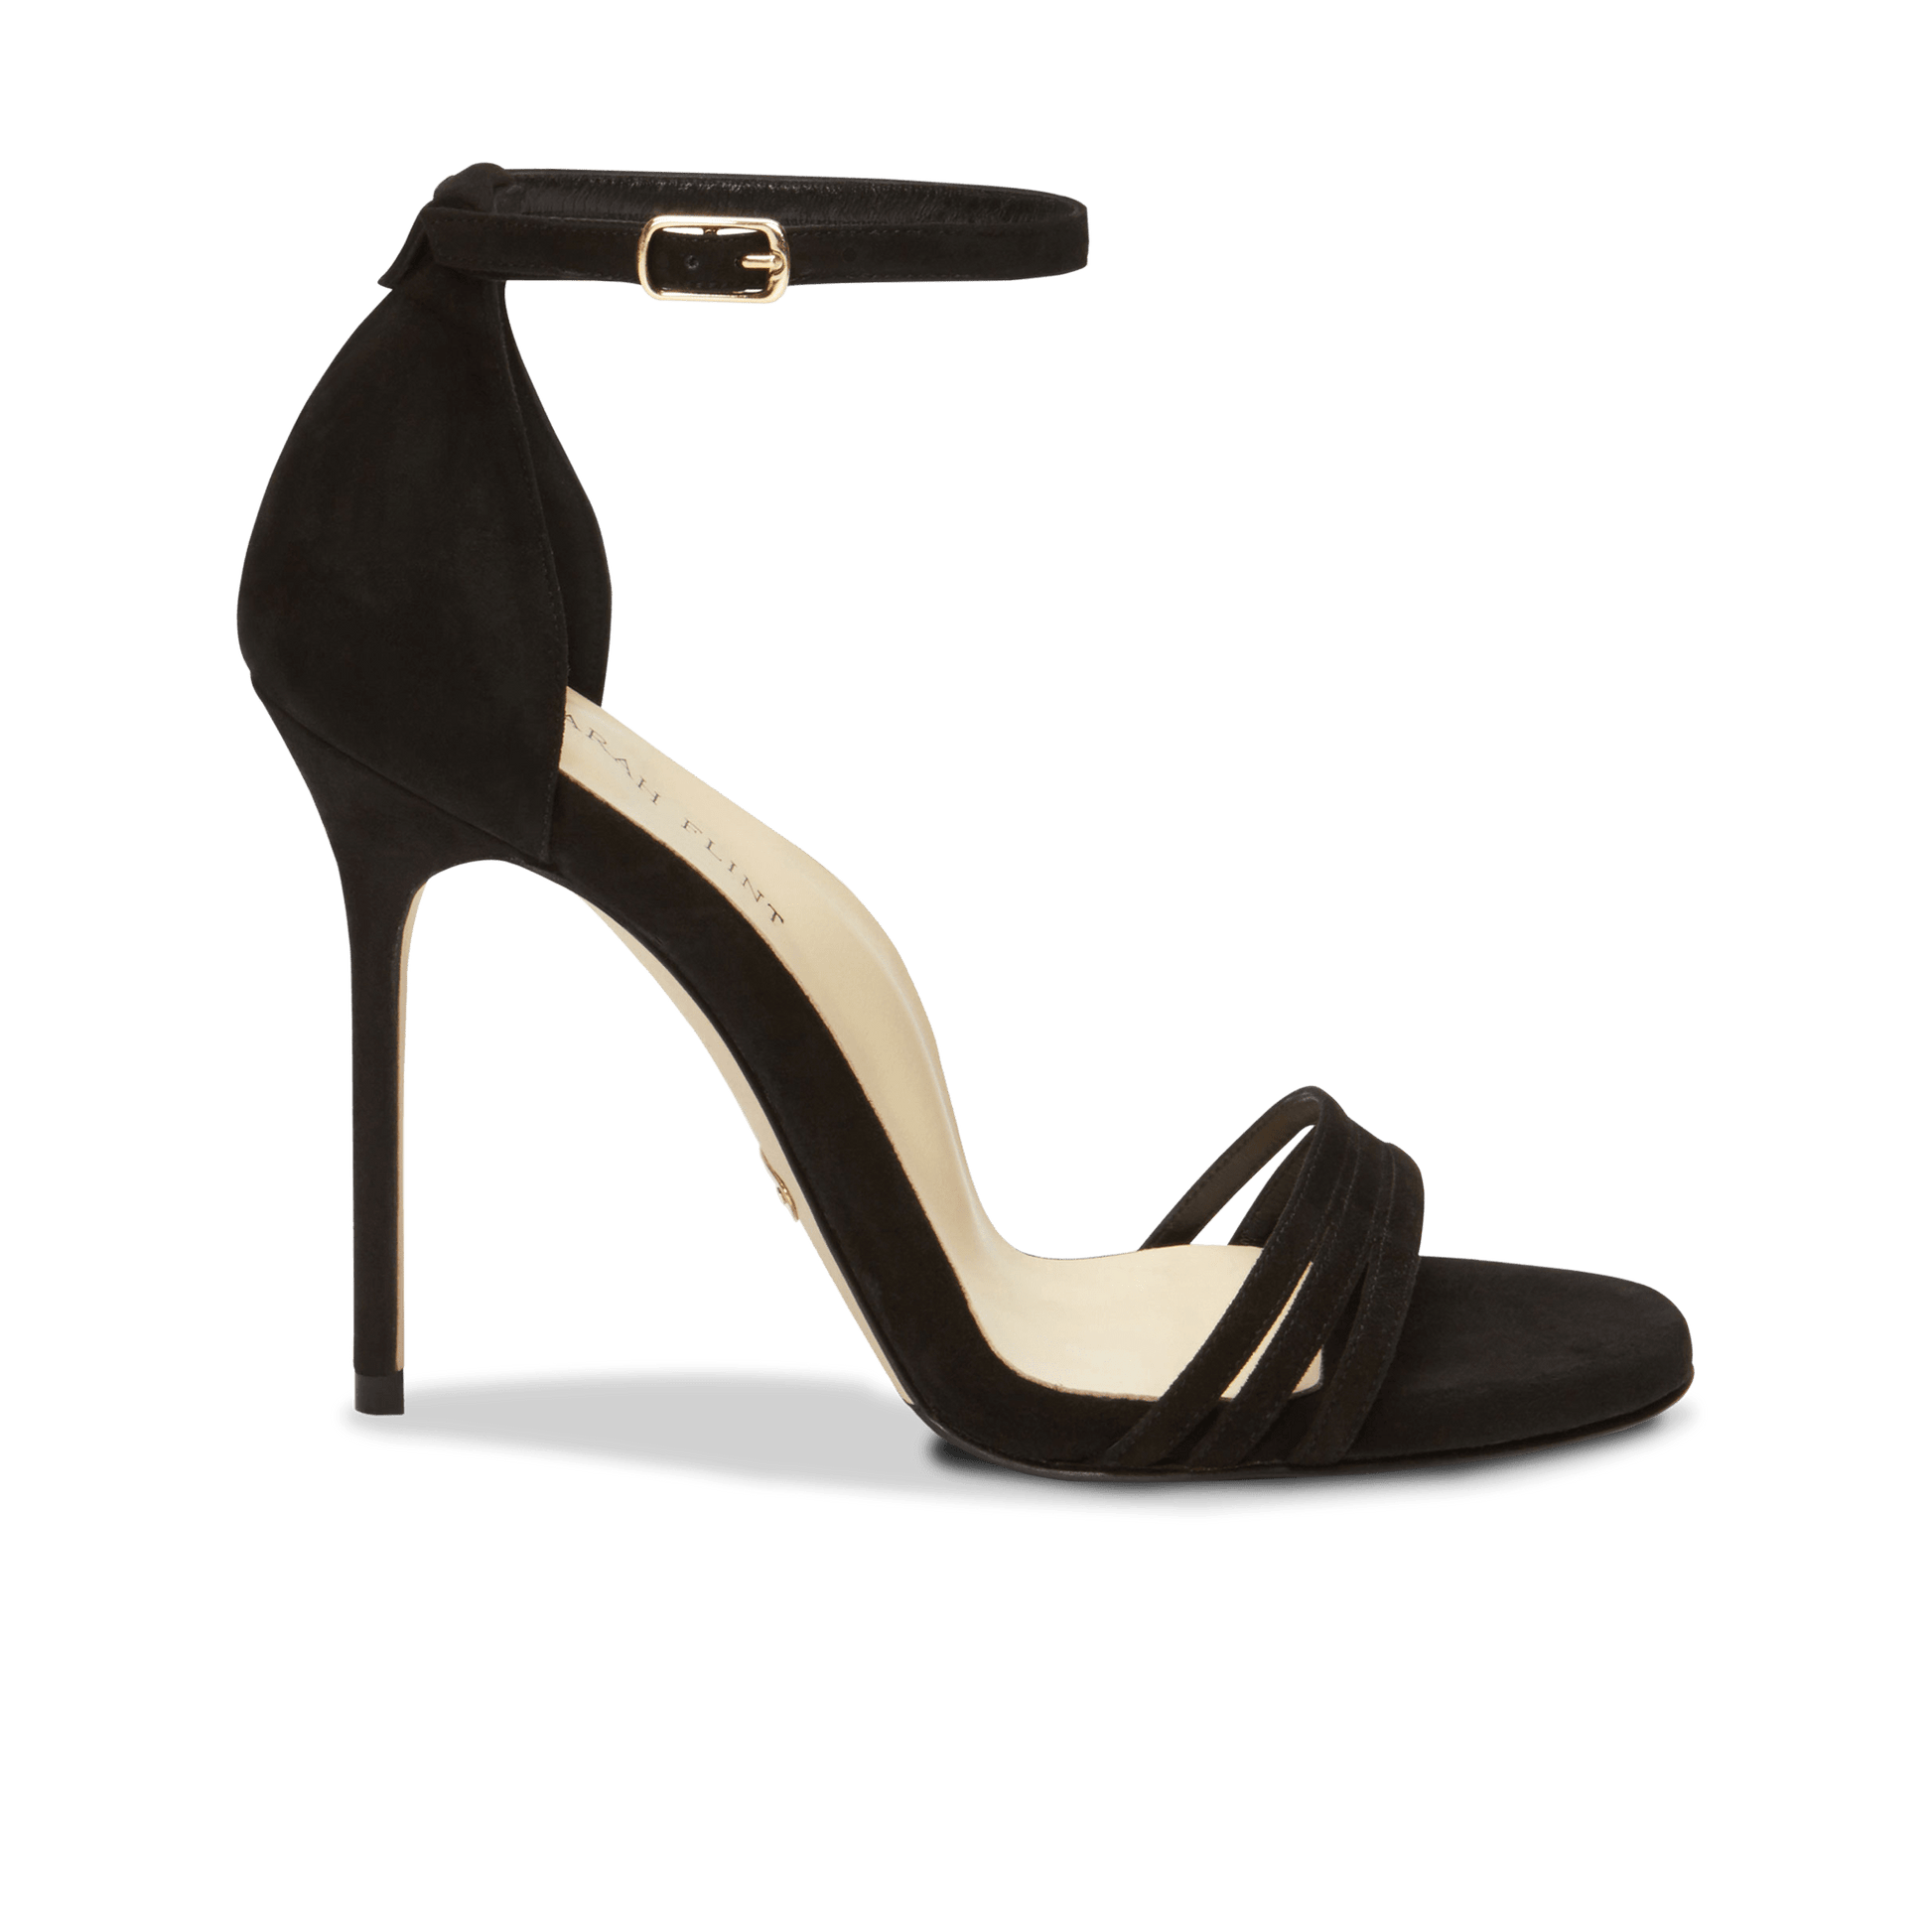 100mm Italian Made Round Toe Perfect Sandal in Black Suede